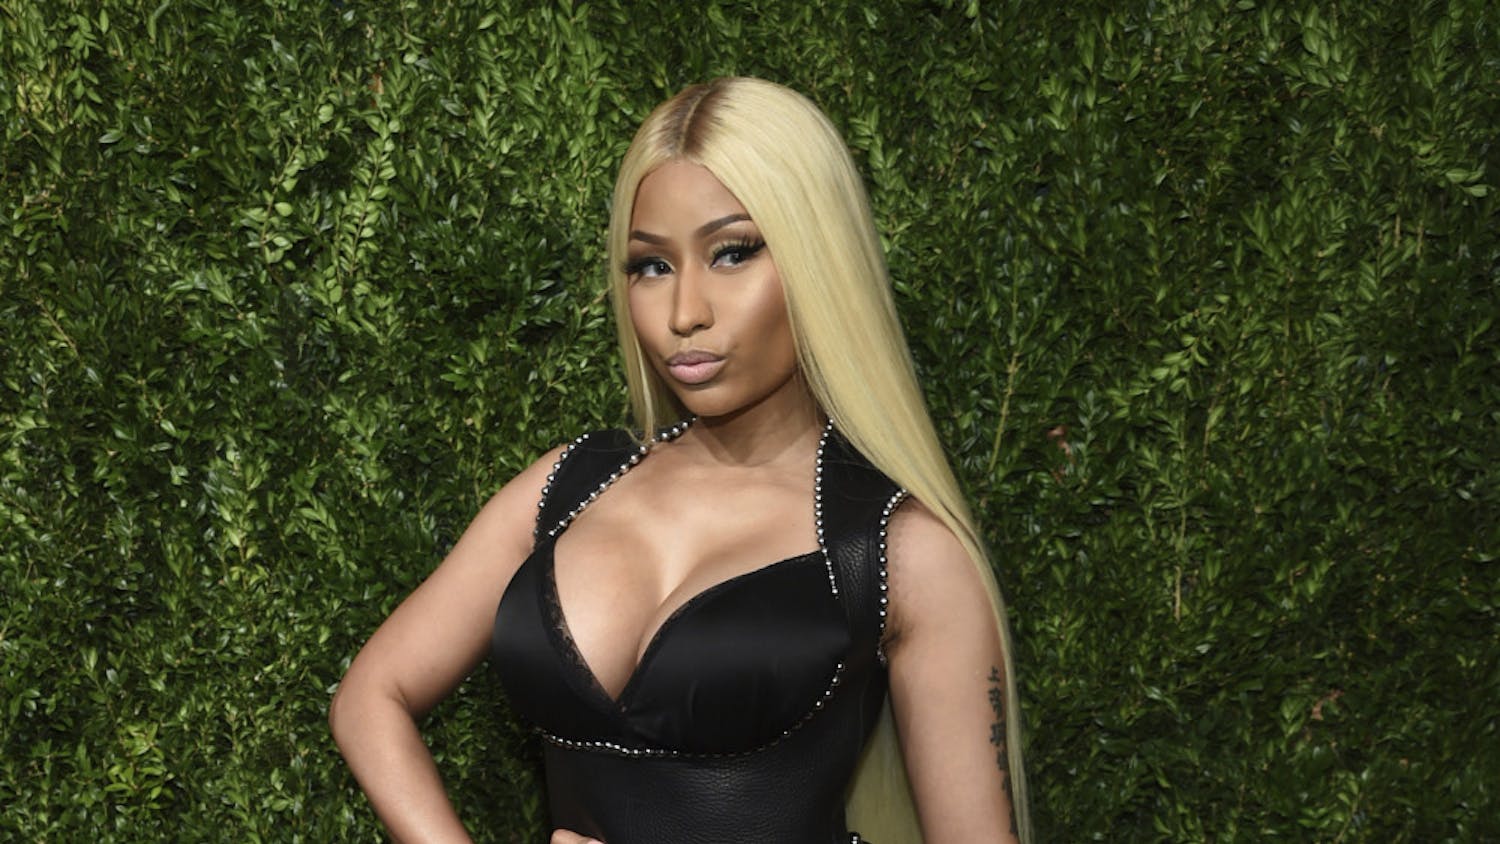 FILE - This Nov. 6, 2017 file photo shows Nicki Minaj at the 14th Annual CFDA Vogue Fashion Fund Gala in New York. The chart-topping rapper announced Thursday, Sept. 5, 2019, on Twitter that she “decided to retire &amp; have my family.” In the tweet, Minaj she took a jab at her critics and asked her fans to “keep reppin me, do it til da death of me.” In July, Minaj announced she was pulling out a show in Saudi Arabia to show support women's rights, gay rights and freedom of expression. She also canceled her appearance at the BET Experience Concert earlier this year. (Photo by Evan Agostini/Invision/AP, File)